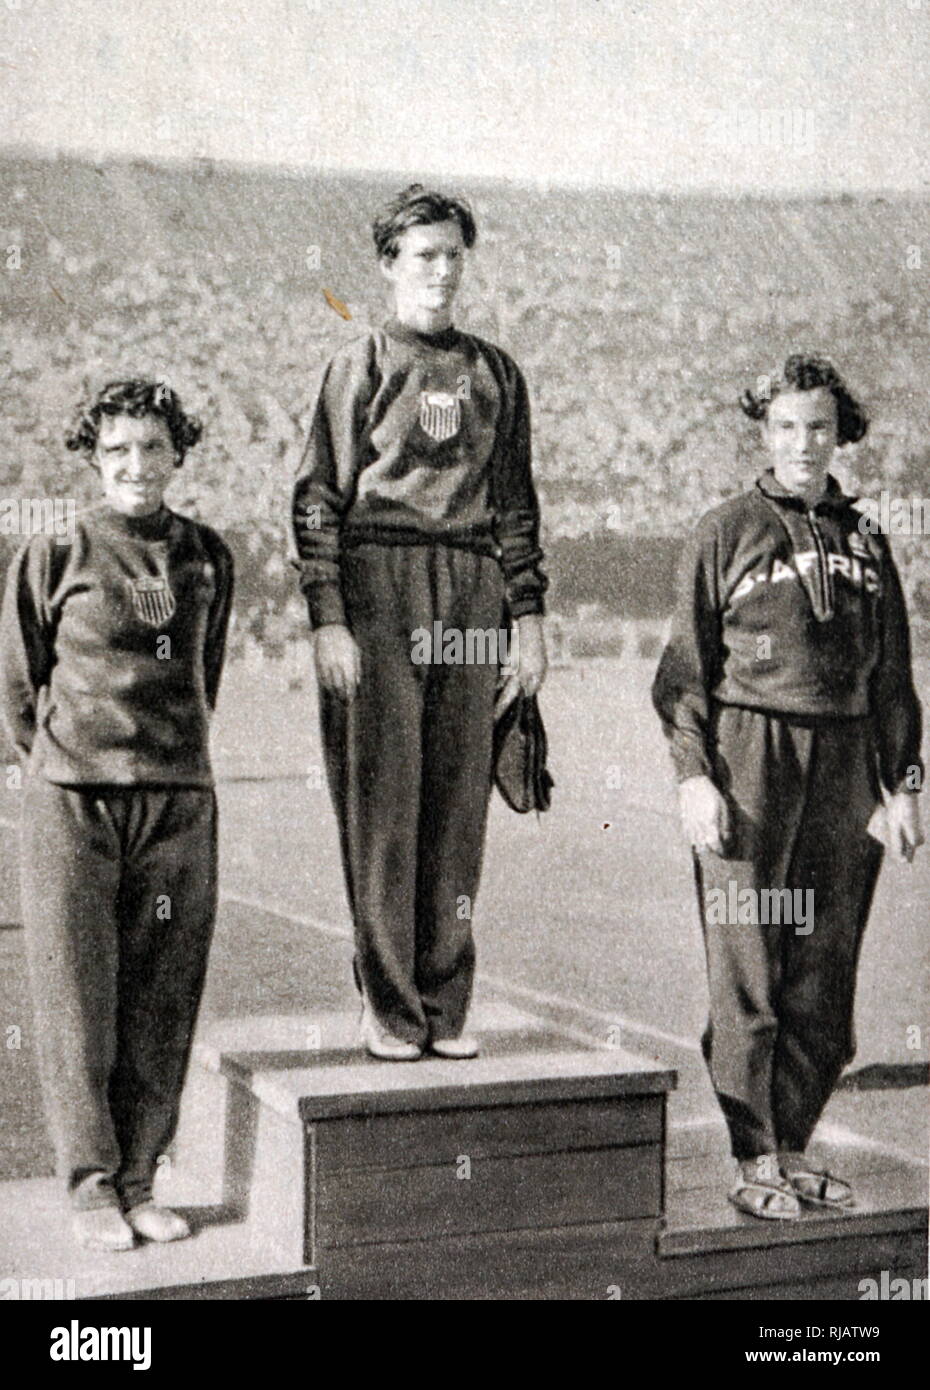 80m Hurdles podium at the 1932 Olympic games.  Mildred Ella 'Babe' Didrikson Zaharias (1911 - 1956) took gold for the USA. Evelyne Ruth Hall (1909 - 1993) took silver for the USA. Marjorie Rees Clark (1909 - 1993) took bronze for South Africa. Stock Photo